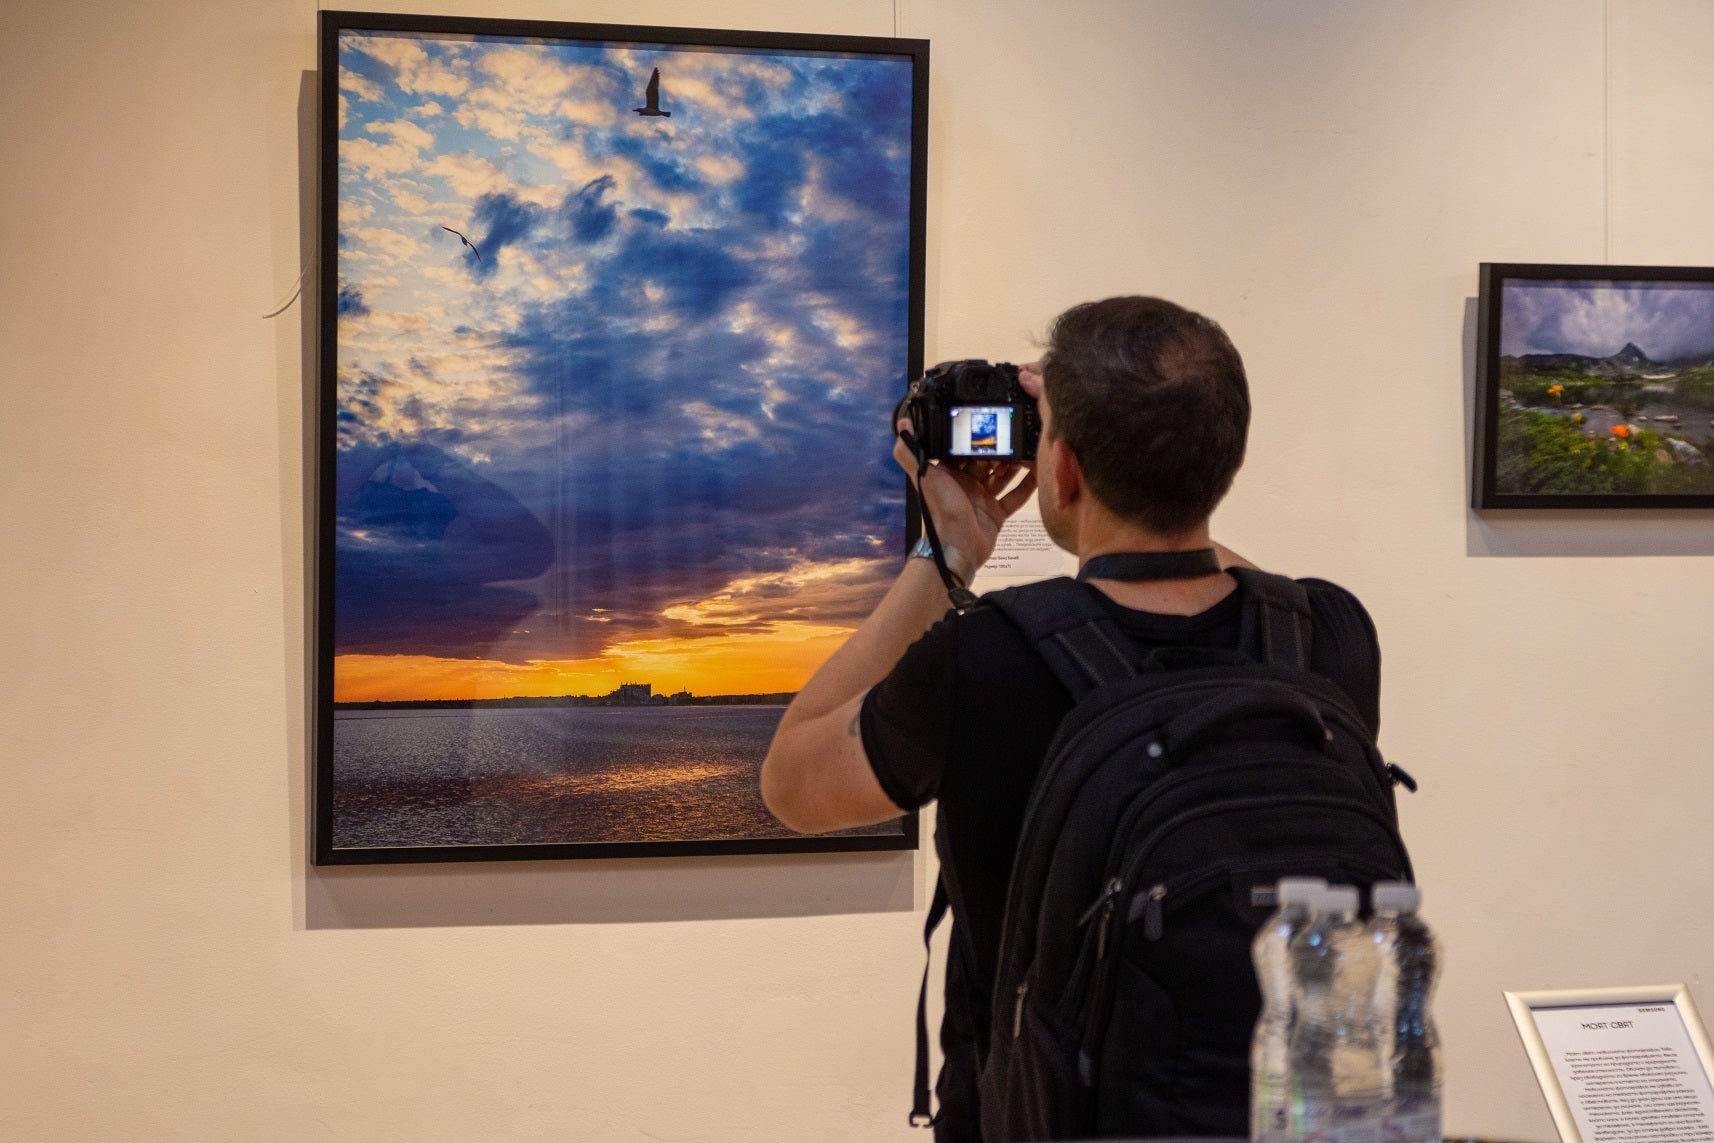 Can you do art photography with a smartphone? Samsung's "My World" exhibition says yes!